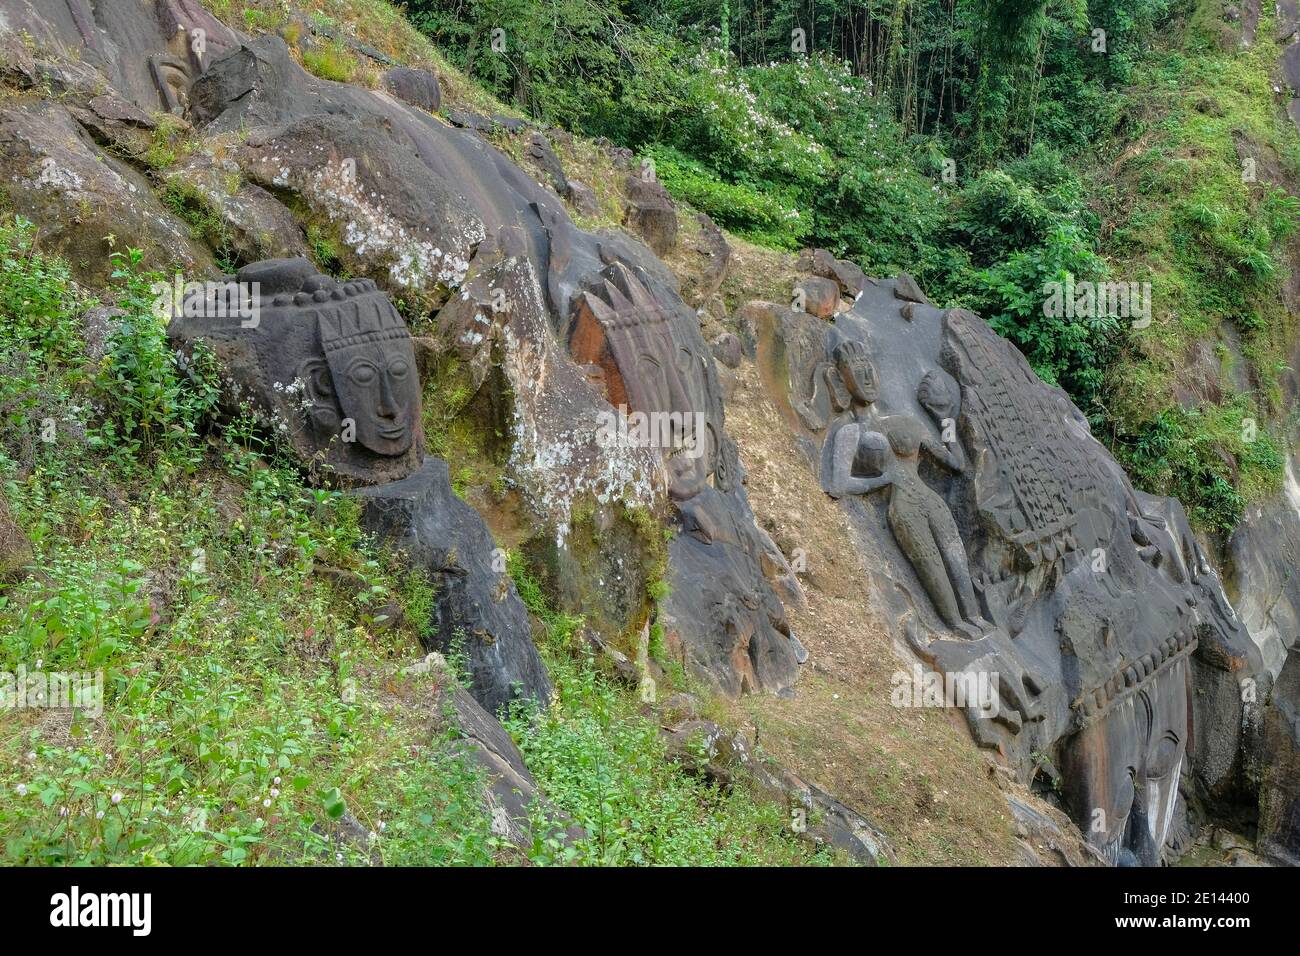 Sculptures carved into the rock at the archaeological site of Unakoti in the state of Tripura. India. Stock Photo